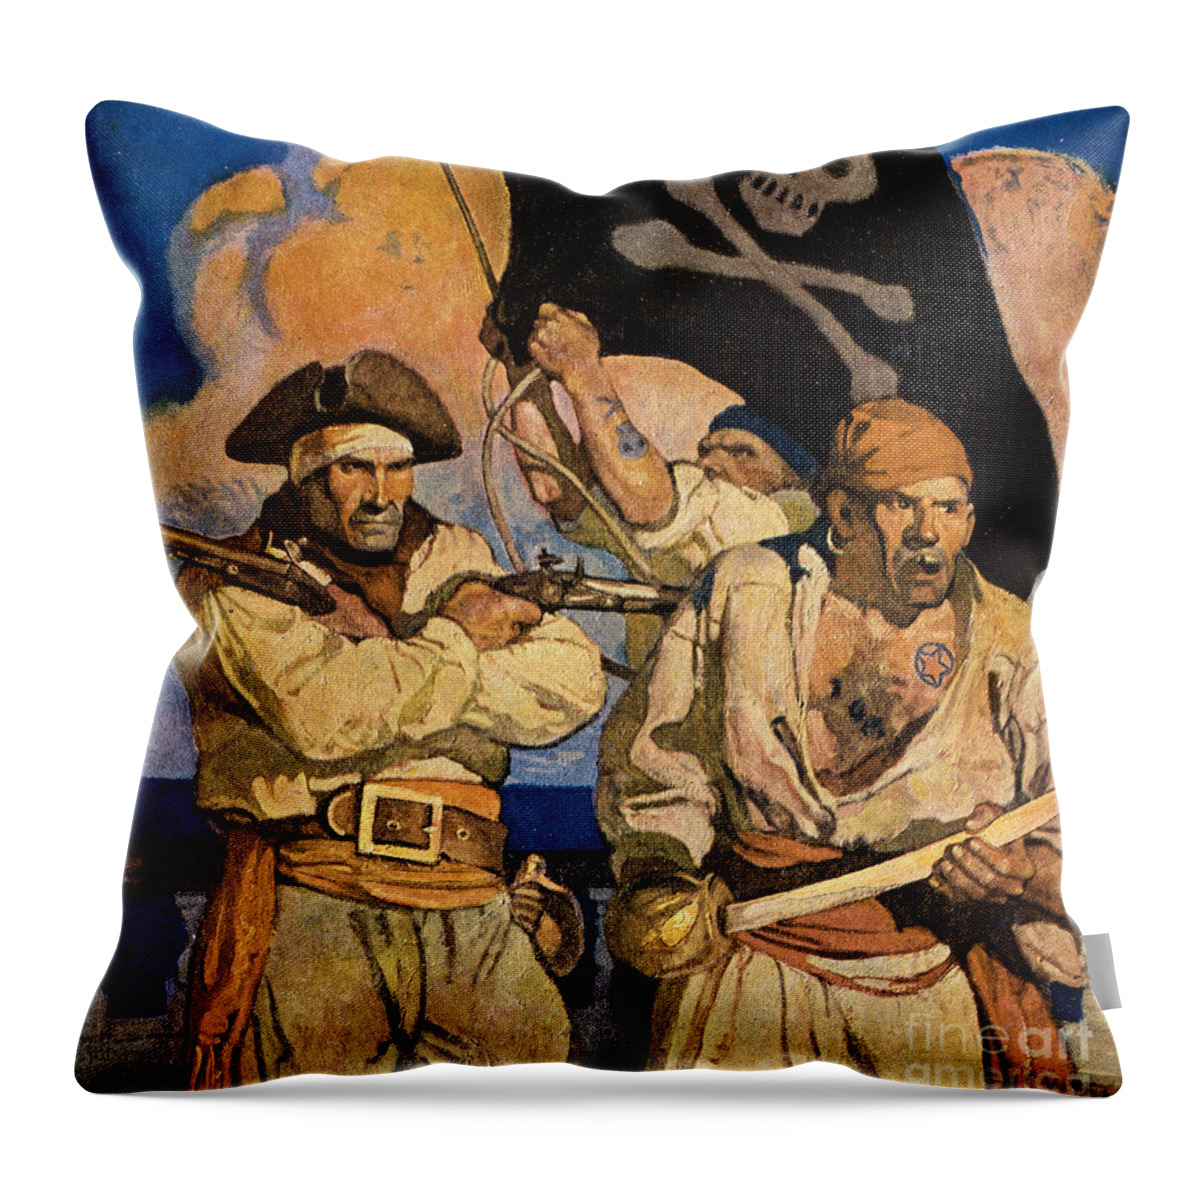 18th Century Throw Pillow featuring the photograph Treasure Island by N C Wyeth